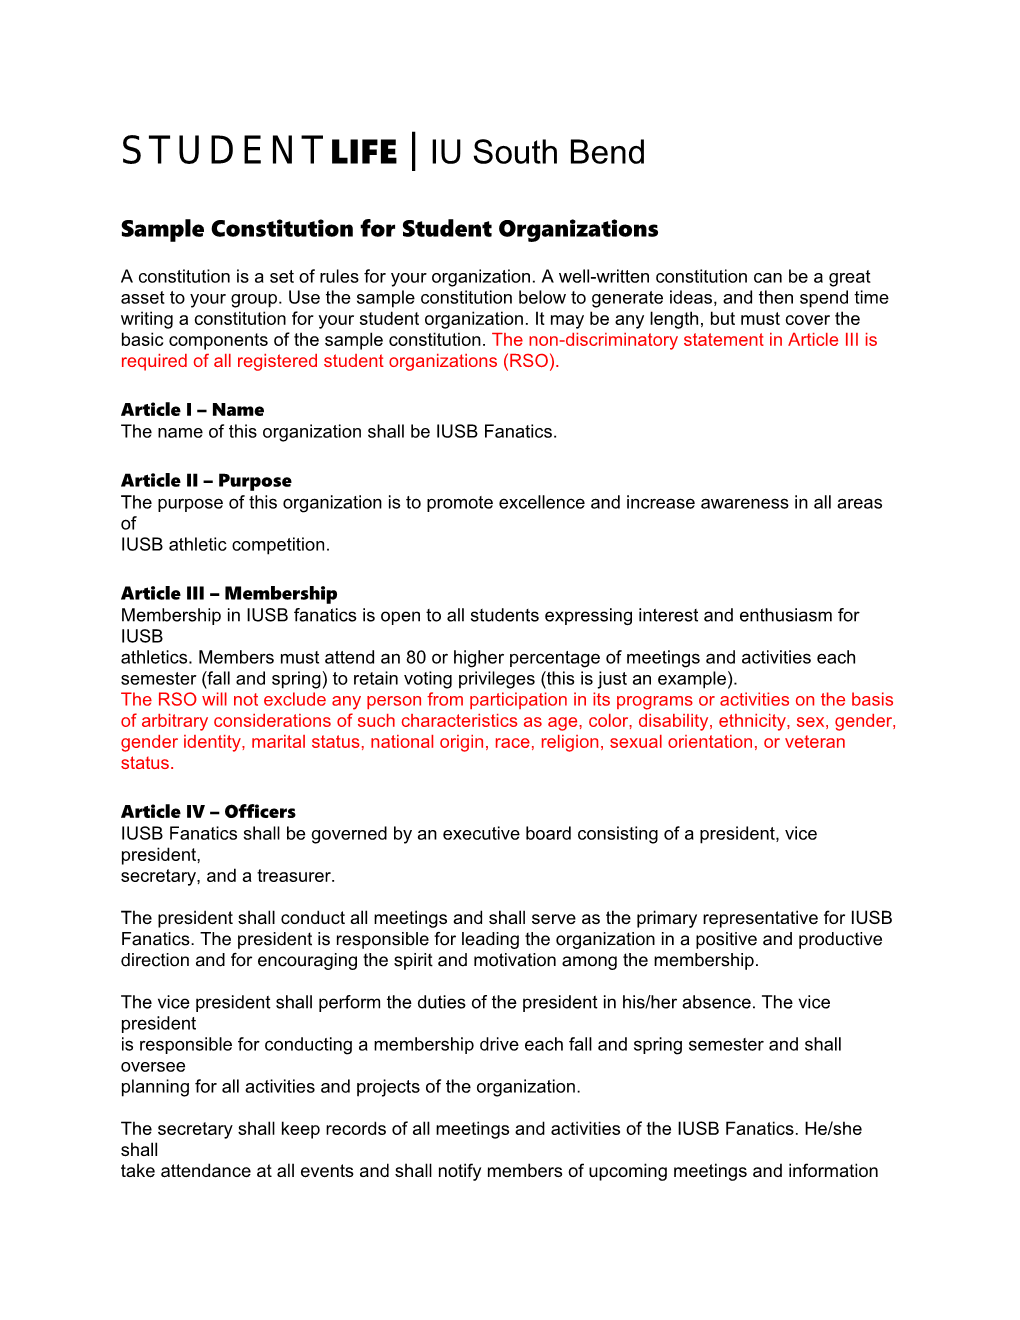 Sample Constitution for Student Organizations